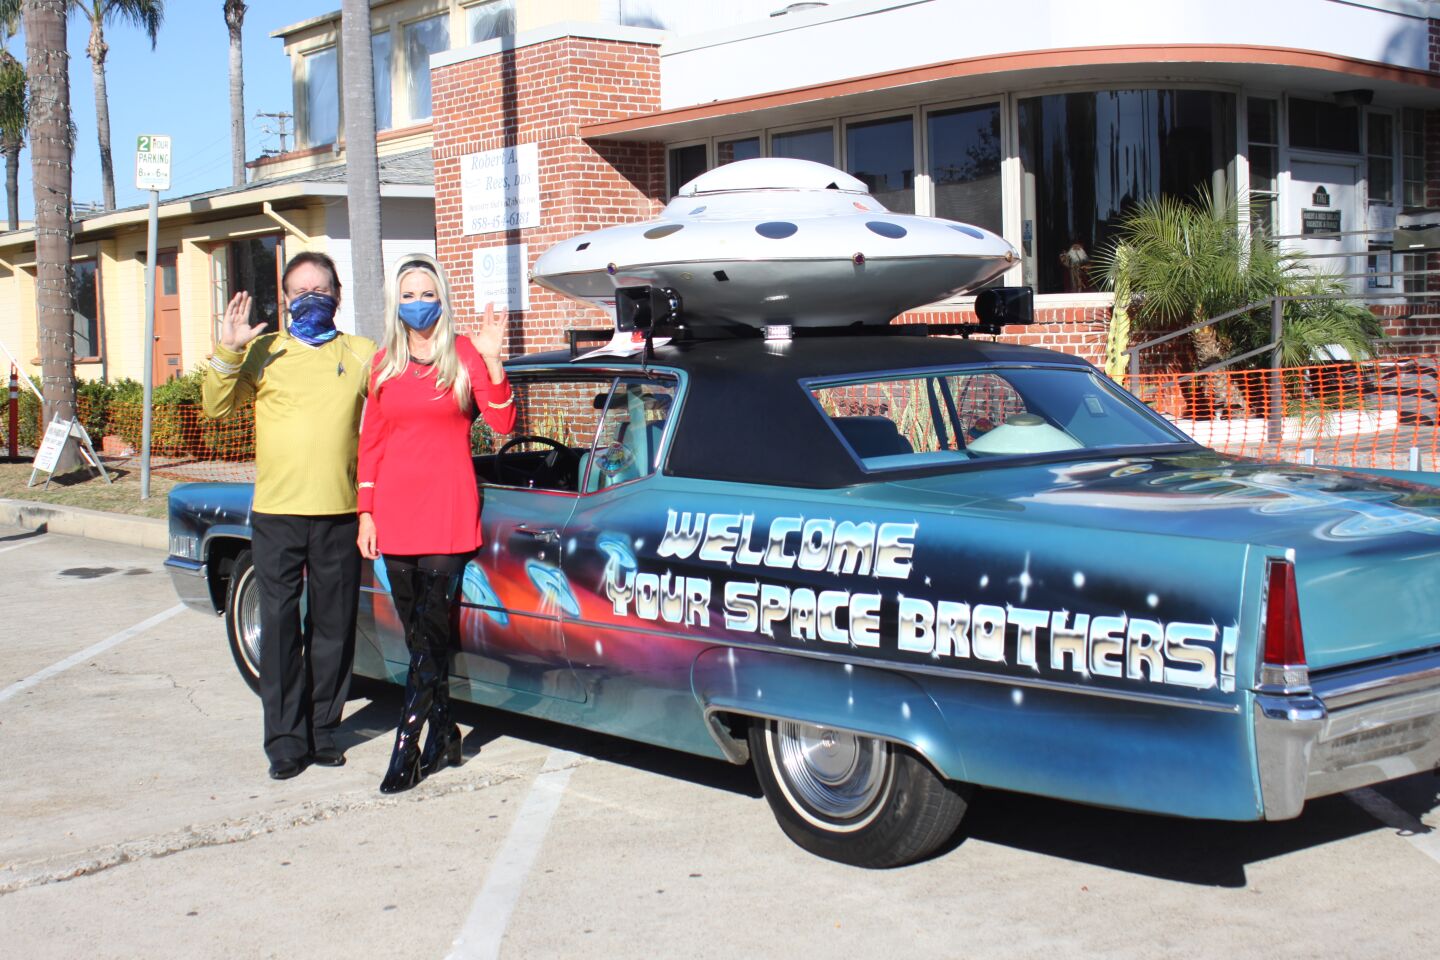 The "Star Trek" universe sent two representatives to the La Jolla Christmas Parade in their space-inspired float.